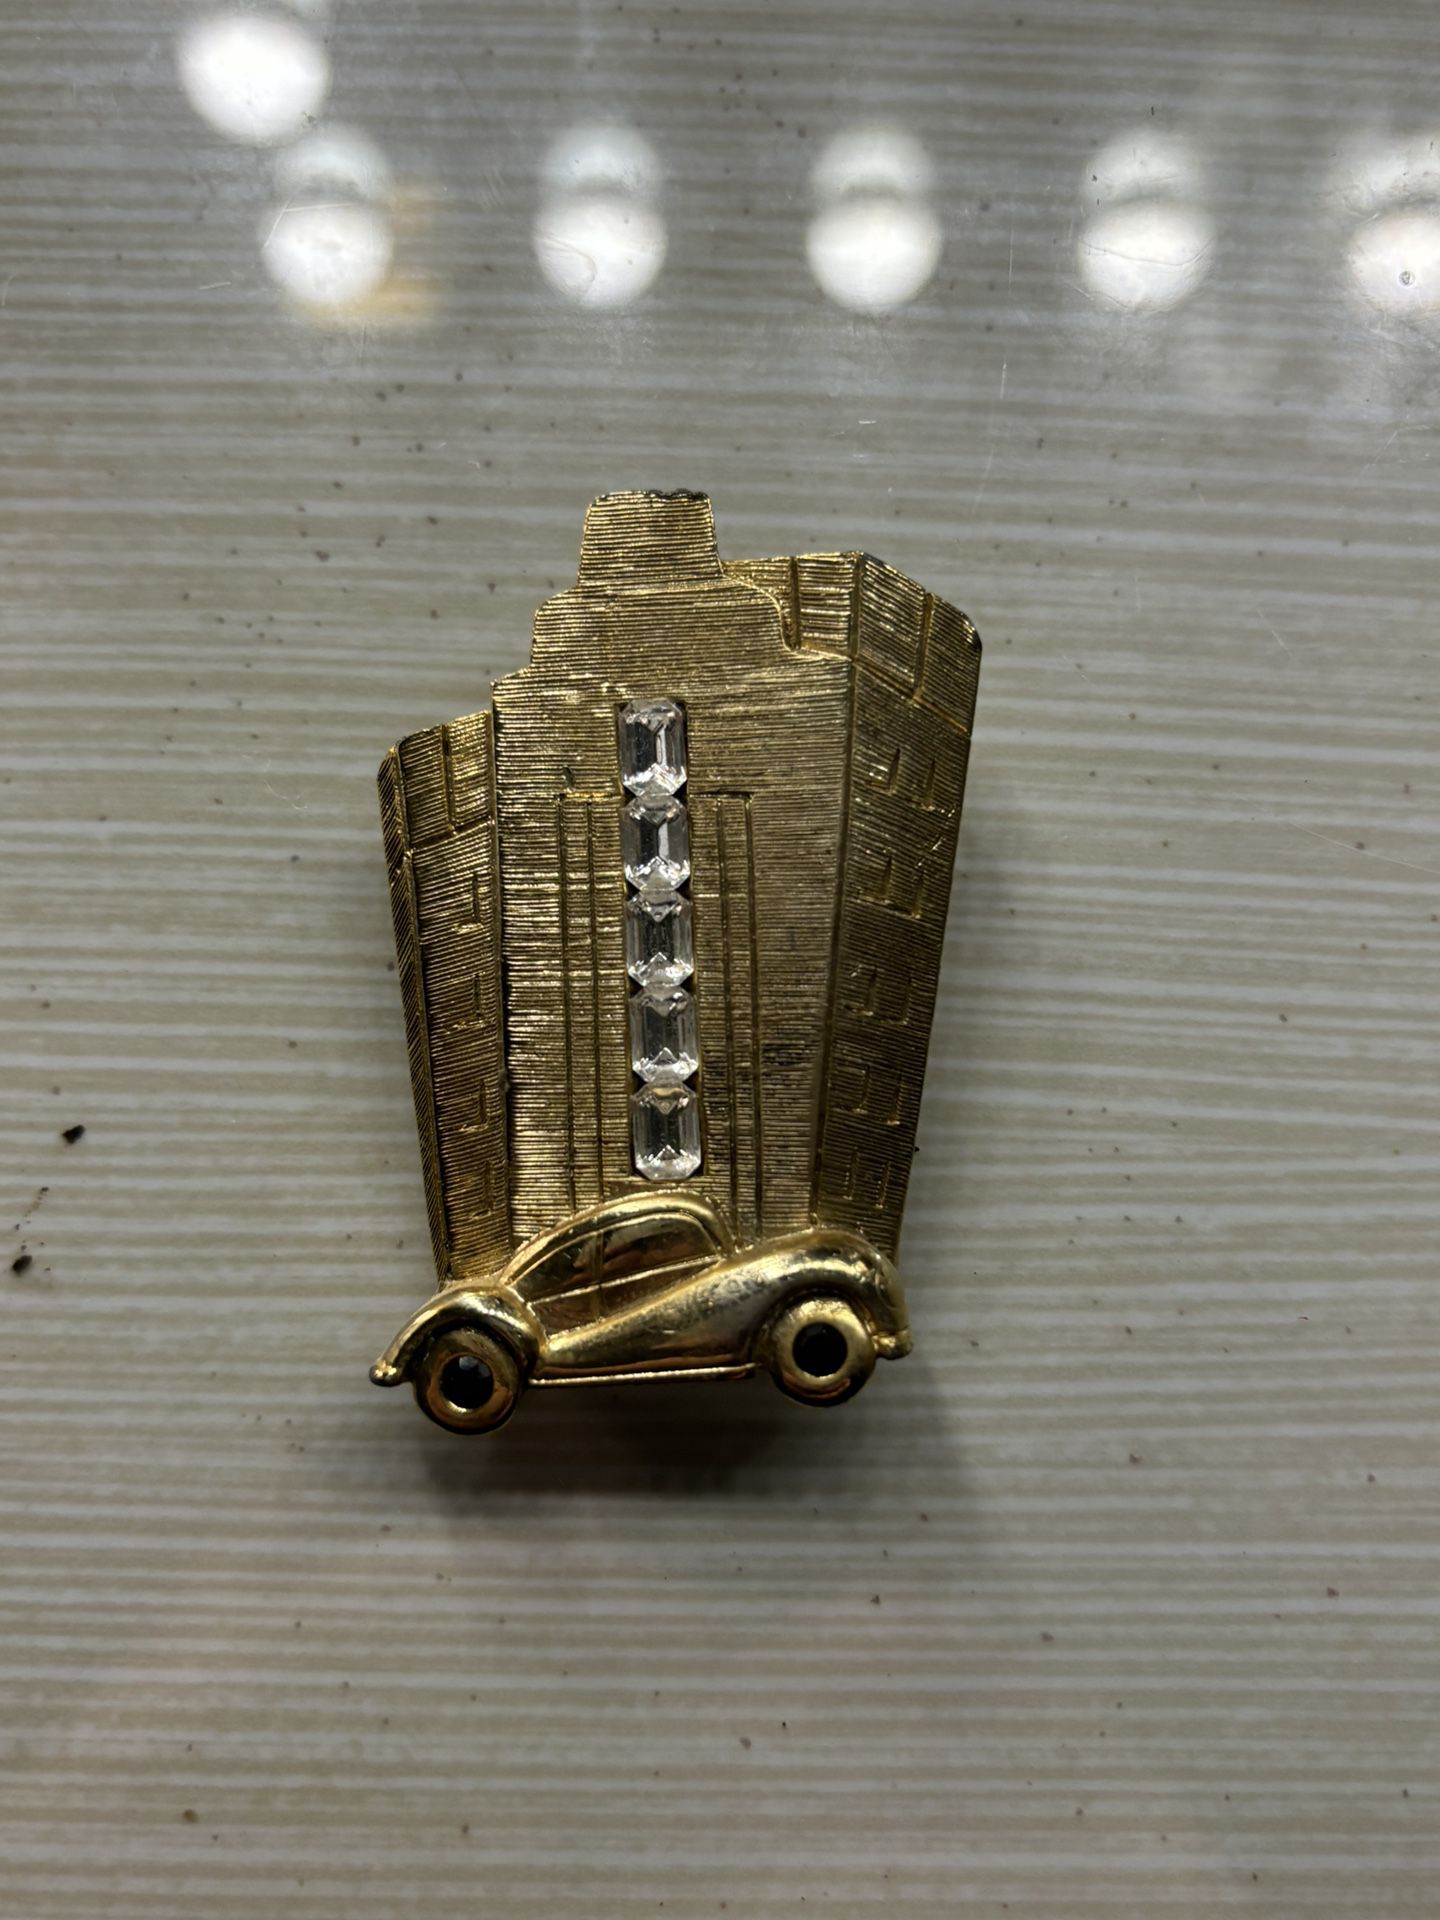 Art DECO style M JENT brooch Building skyscraper and old car vintage signed